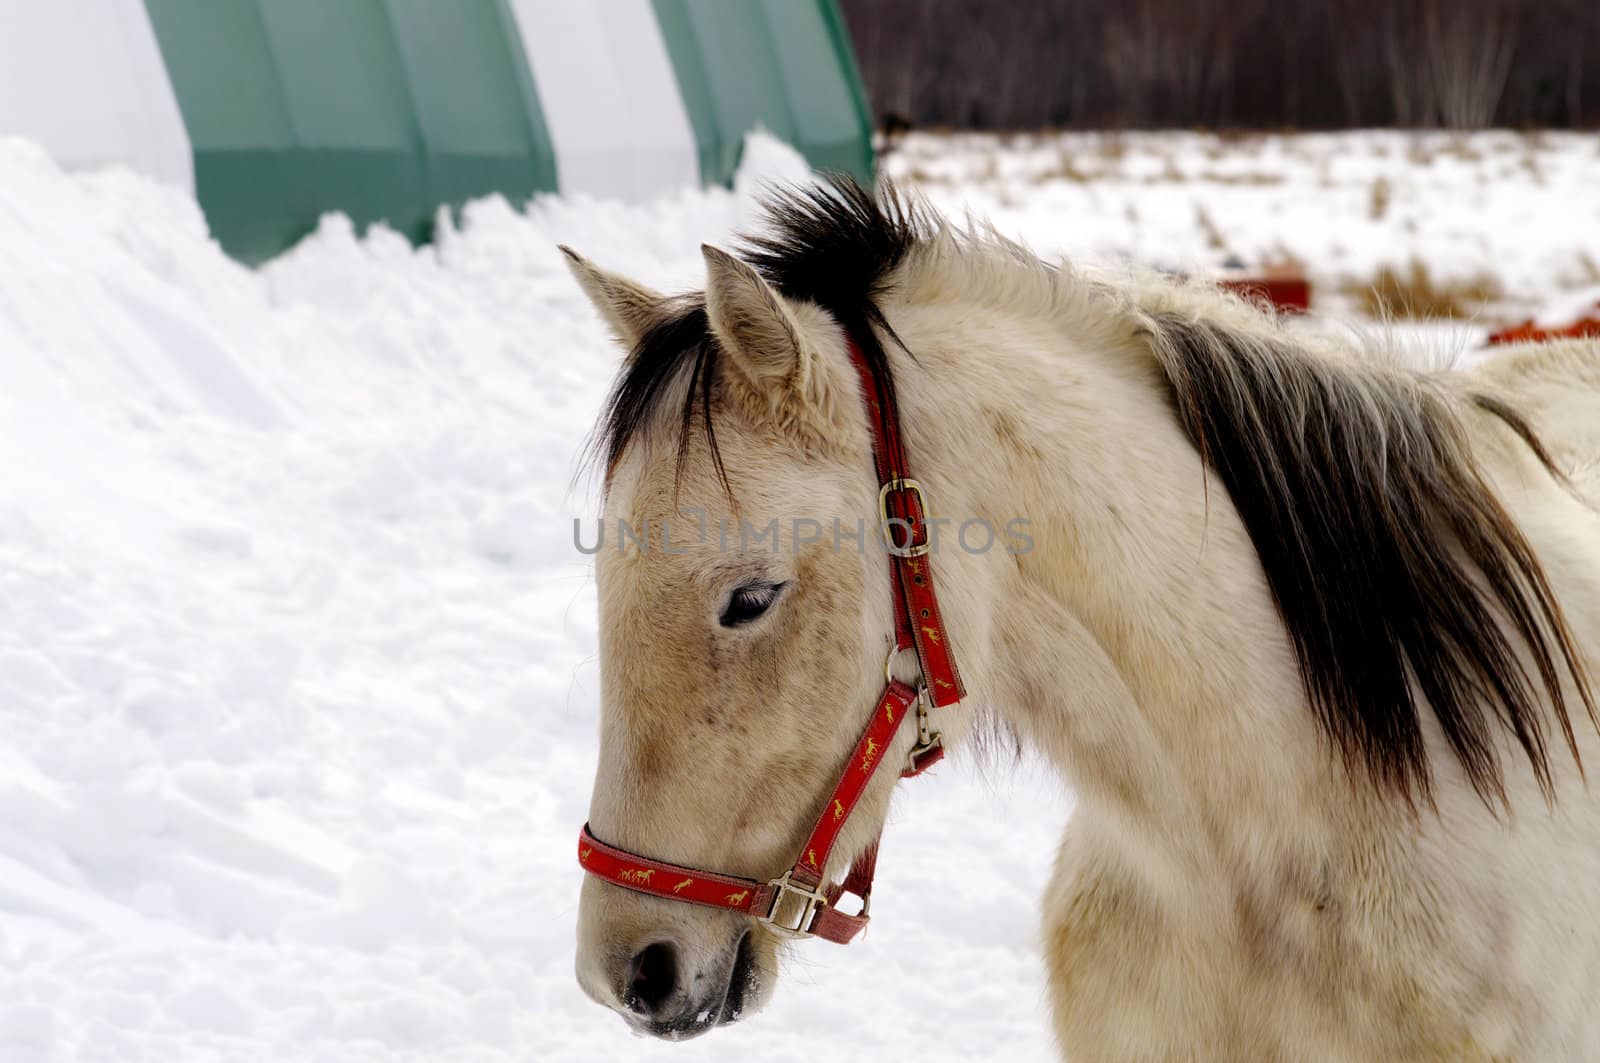 A dun horse in the winter